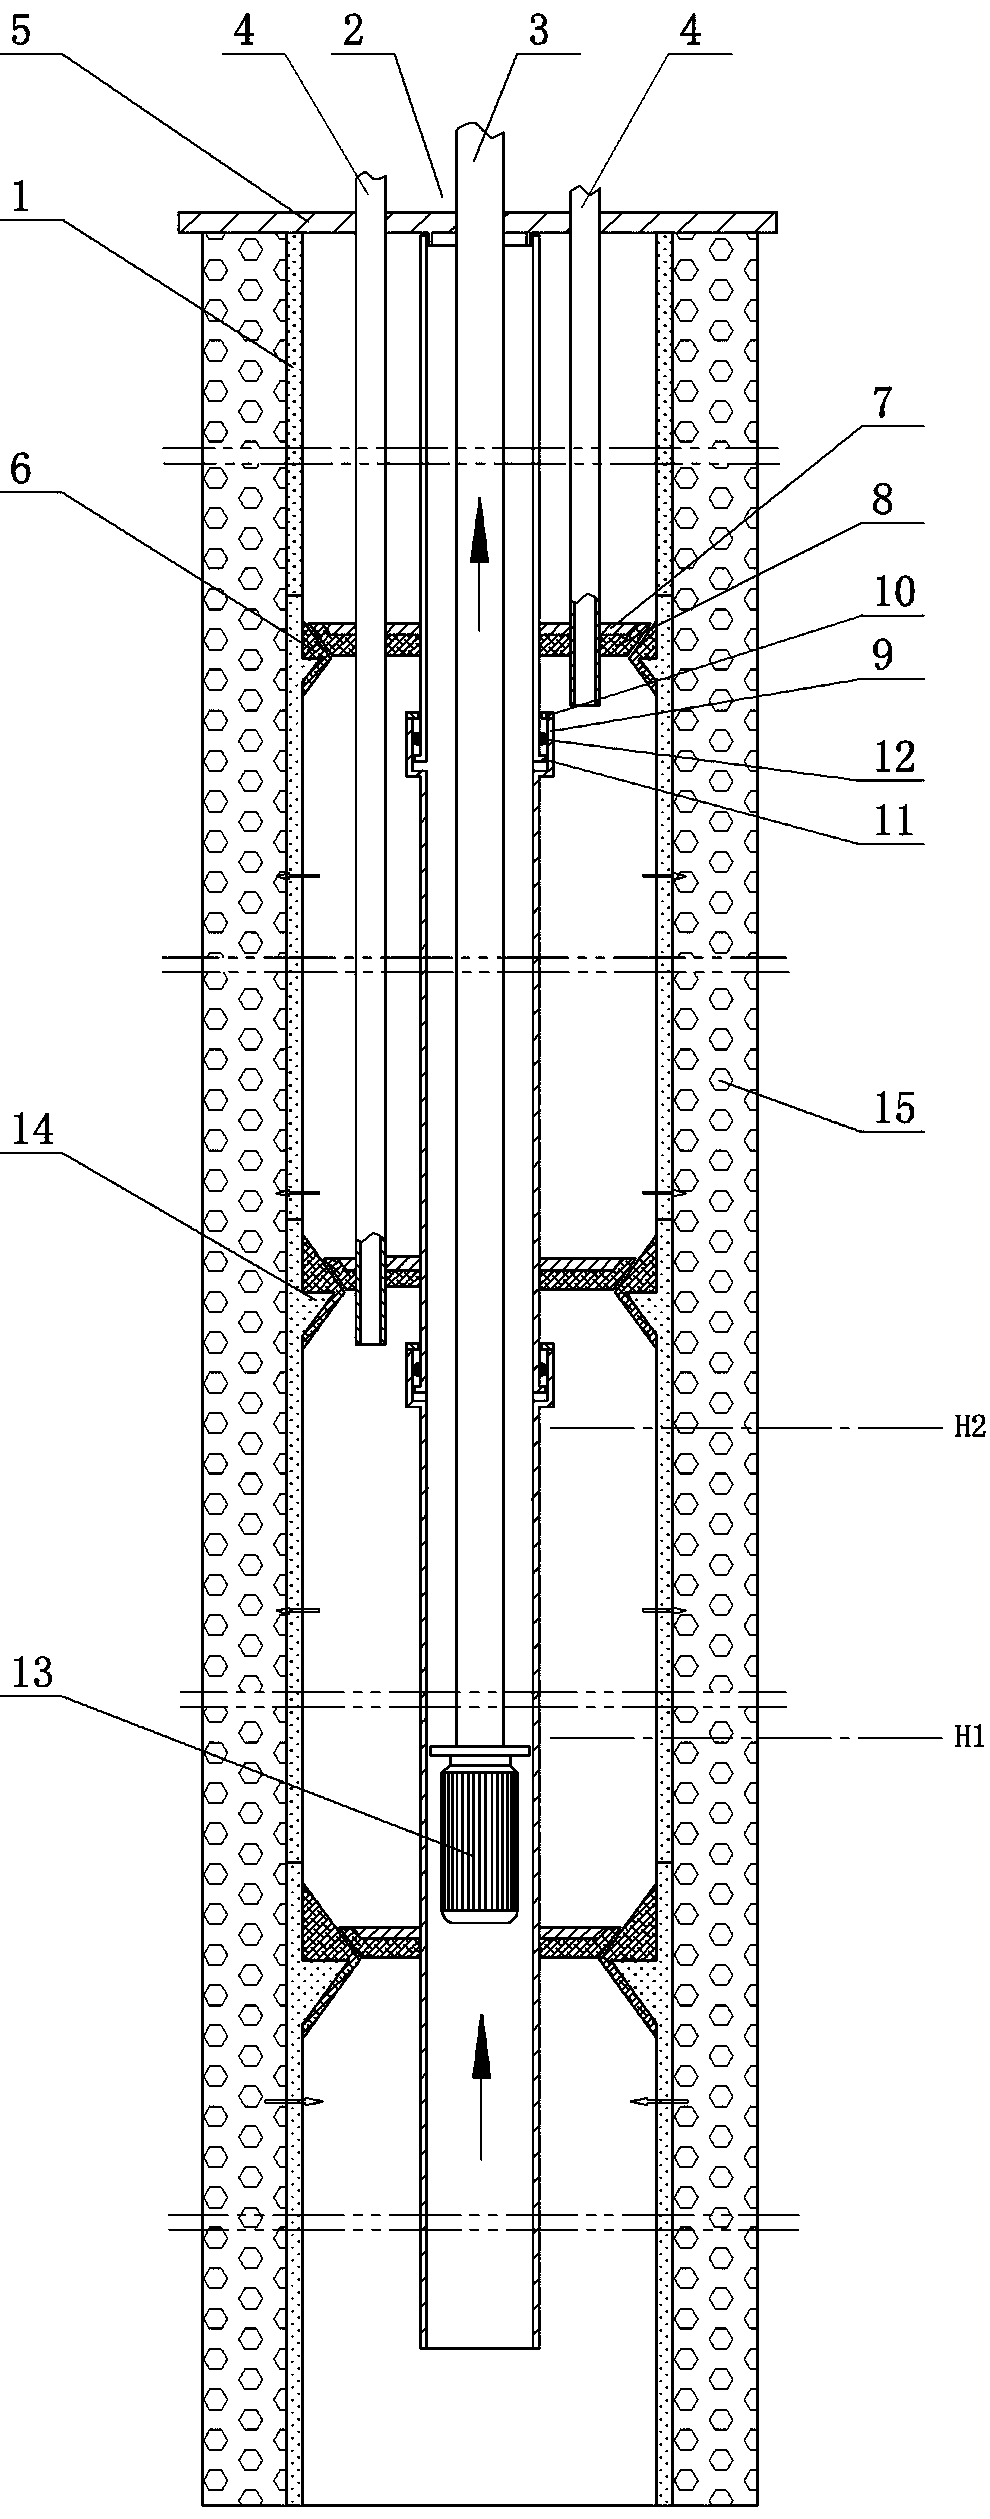 Compensated shallow geothermal energy conversion device in the same well for geothermal energy central air conditioning